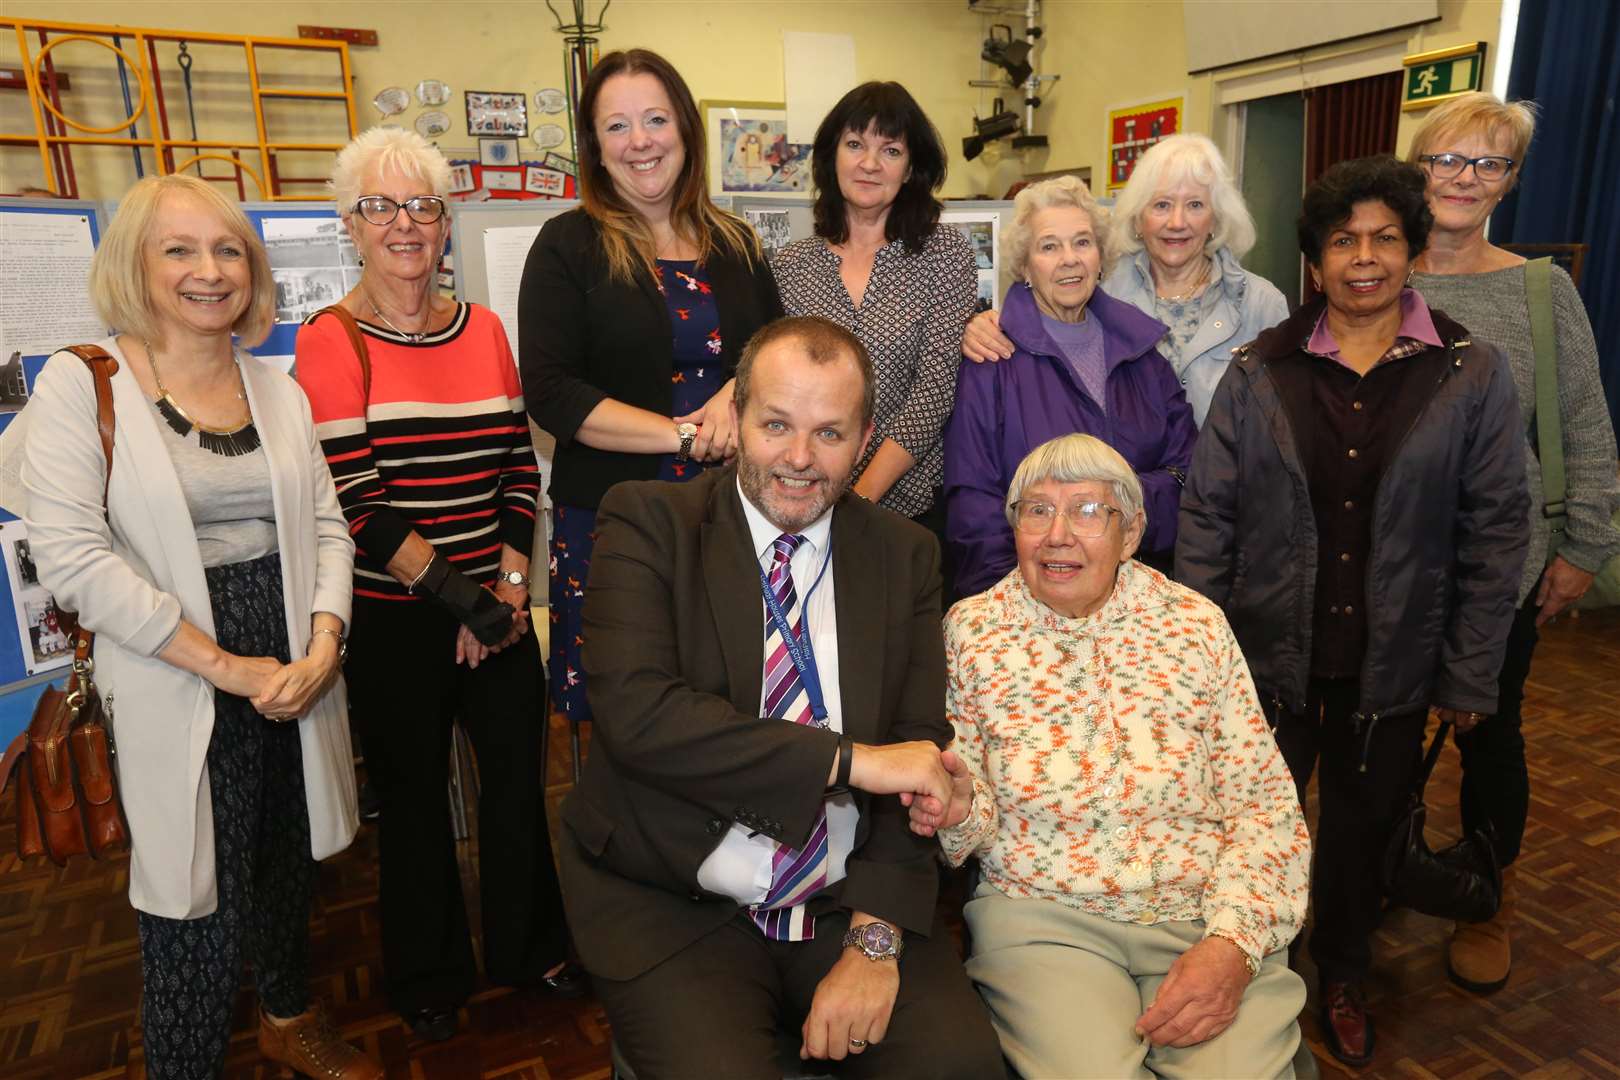 Head teacher Ryan Driver with Madge Borner, who taught at the school between 1947-1988, Lindsay Fordyce, deputy head, directly behind Ryan plus other former and current staff